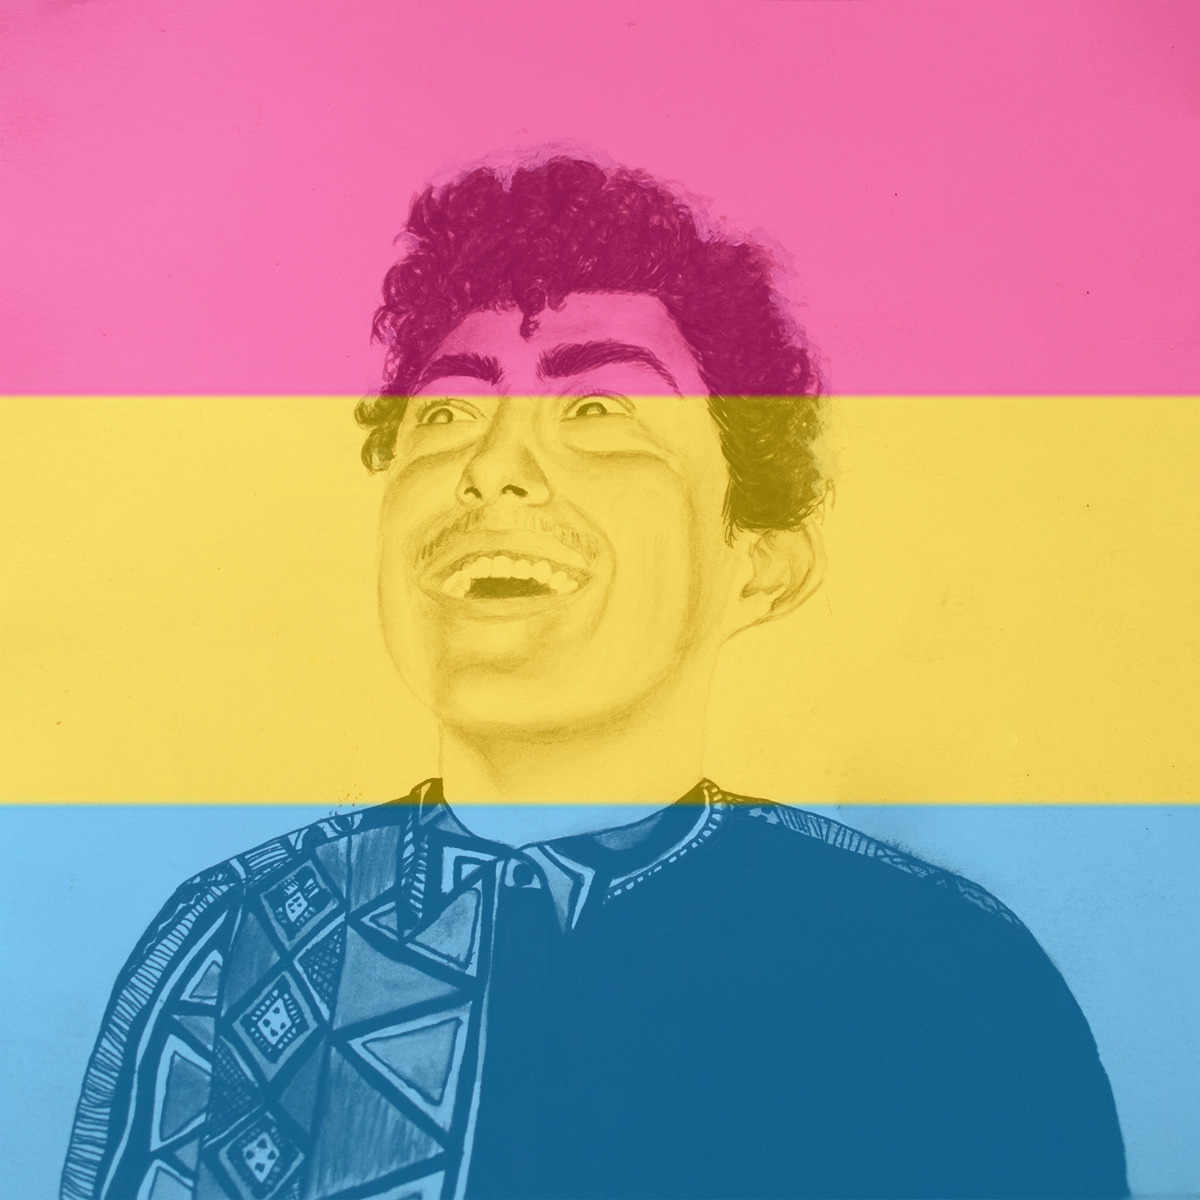 your favorite album is - Rise Hobo Johnson by Hobo Johnson is...